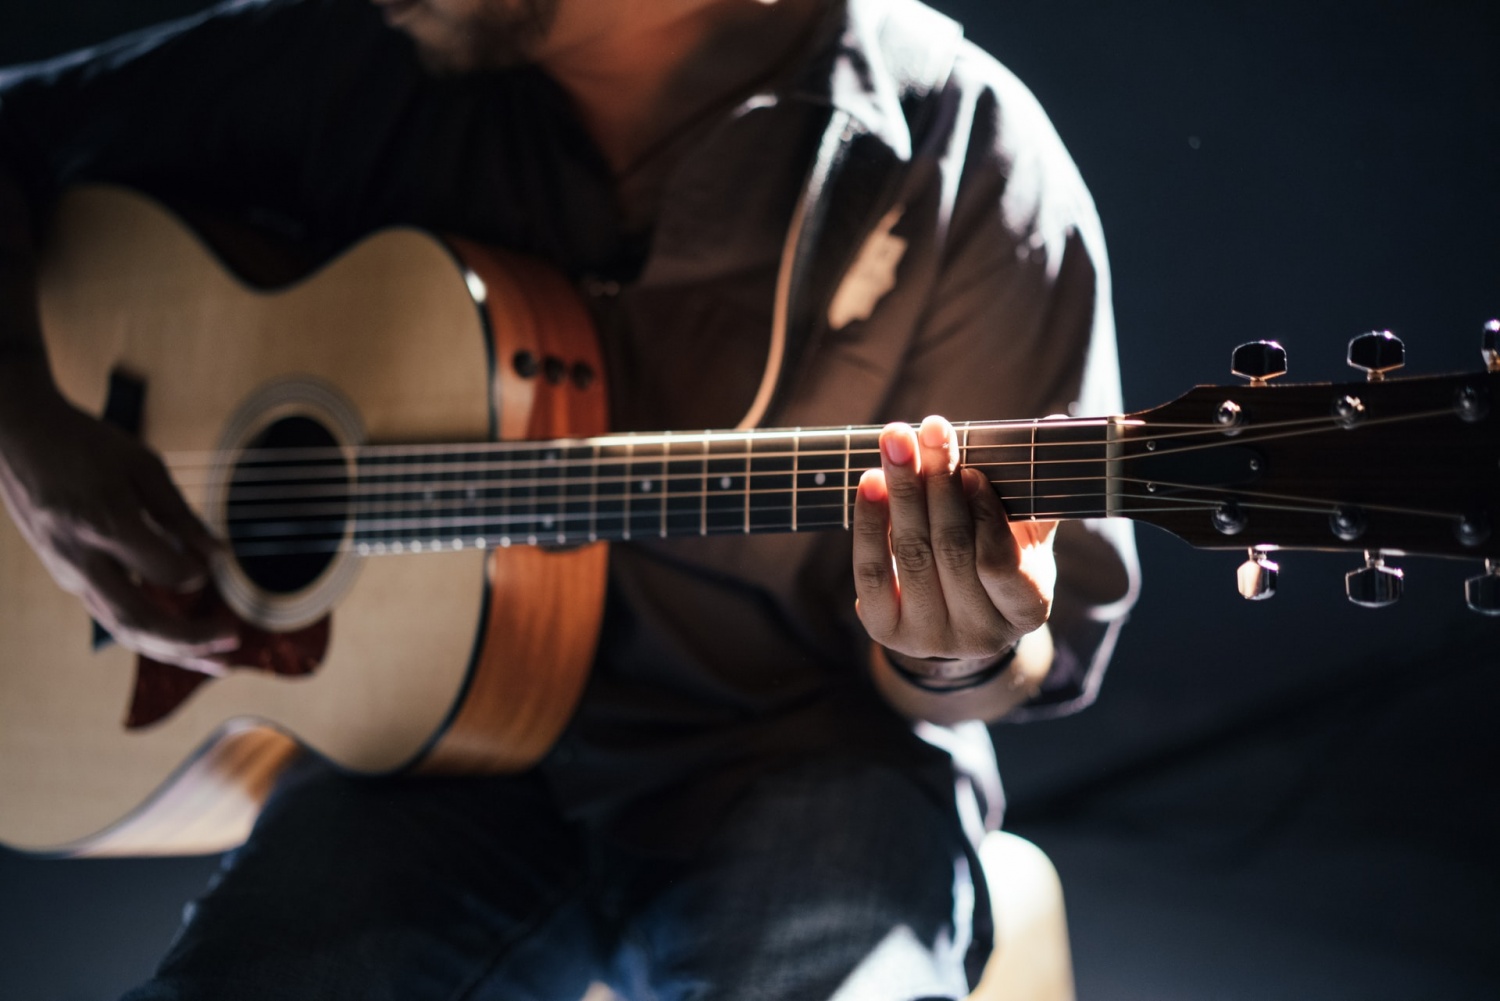 How Can Musicians Pitch Their Music in Digital Era and Earn Money in the Process?